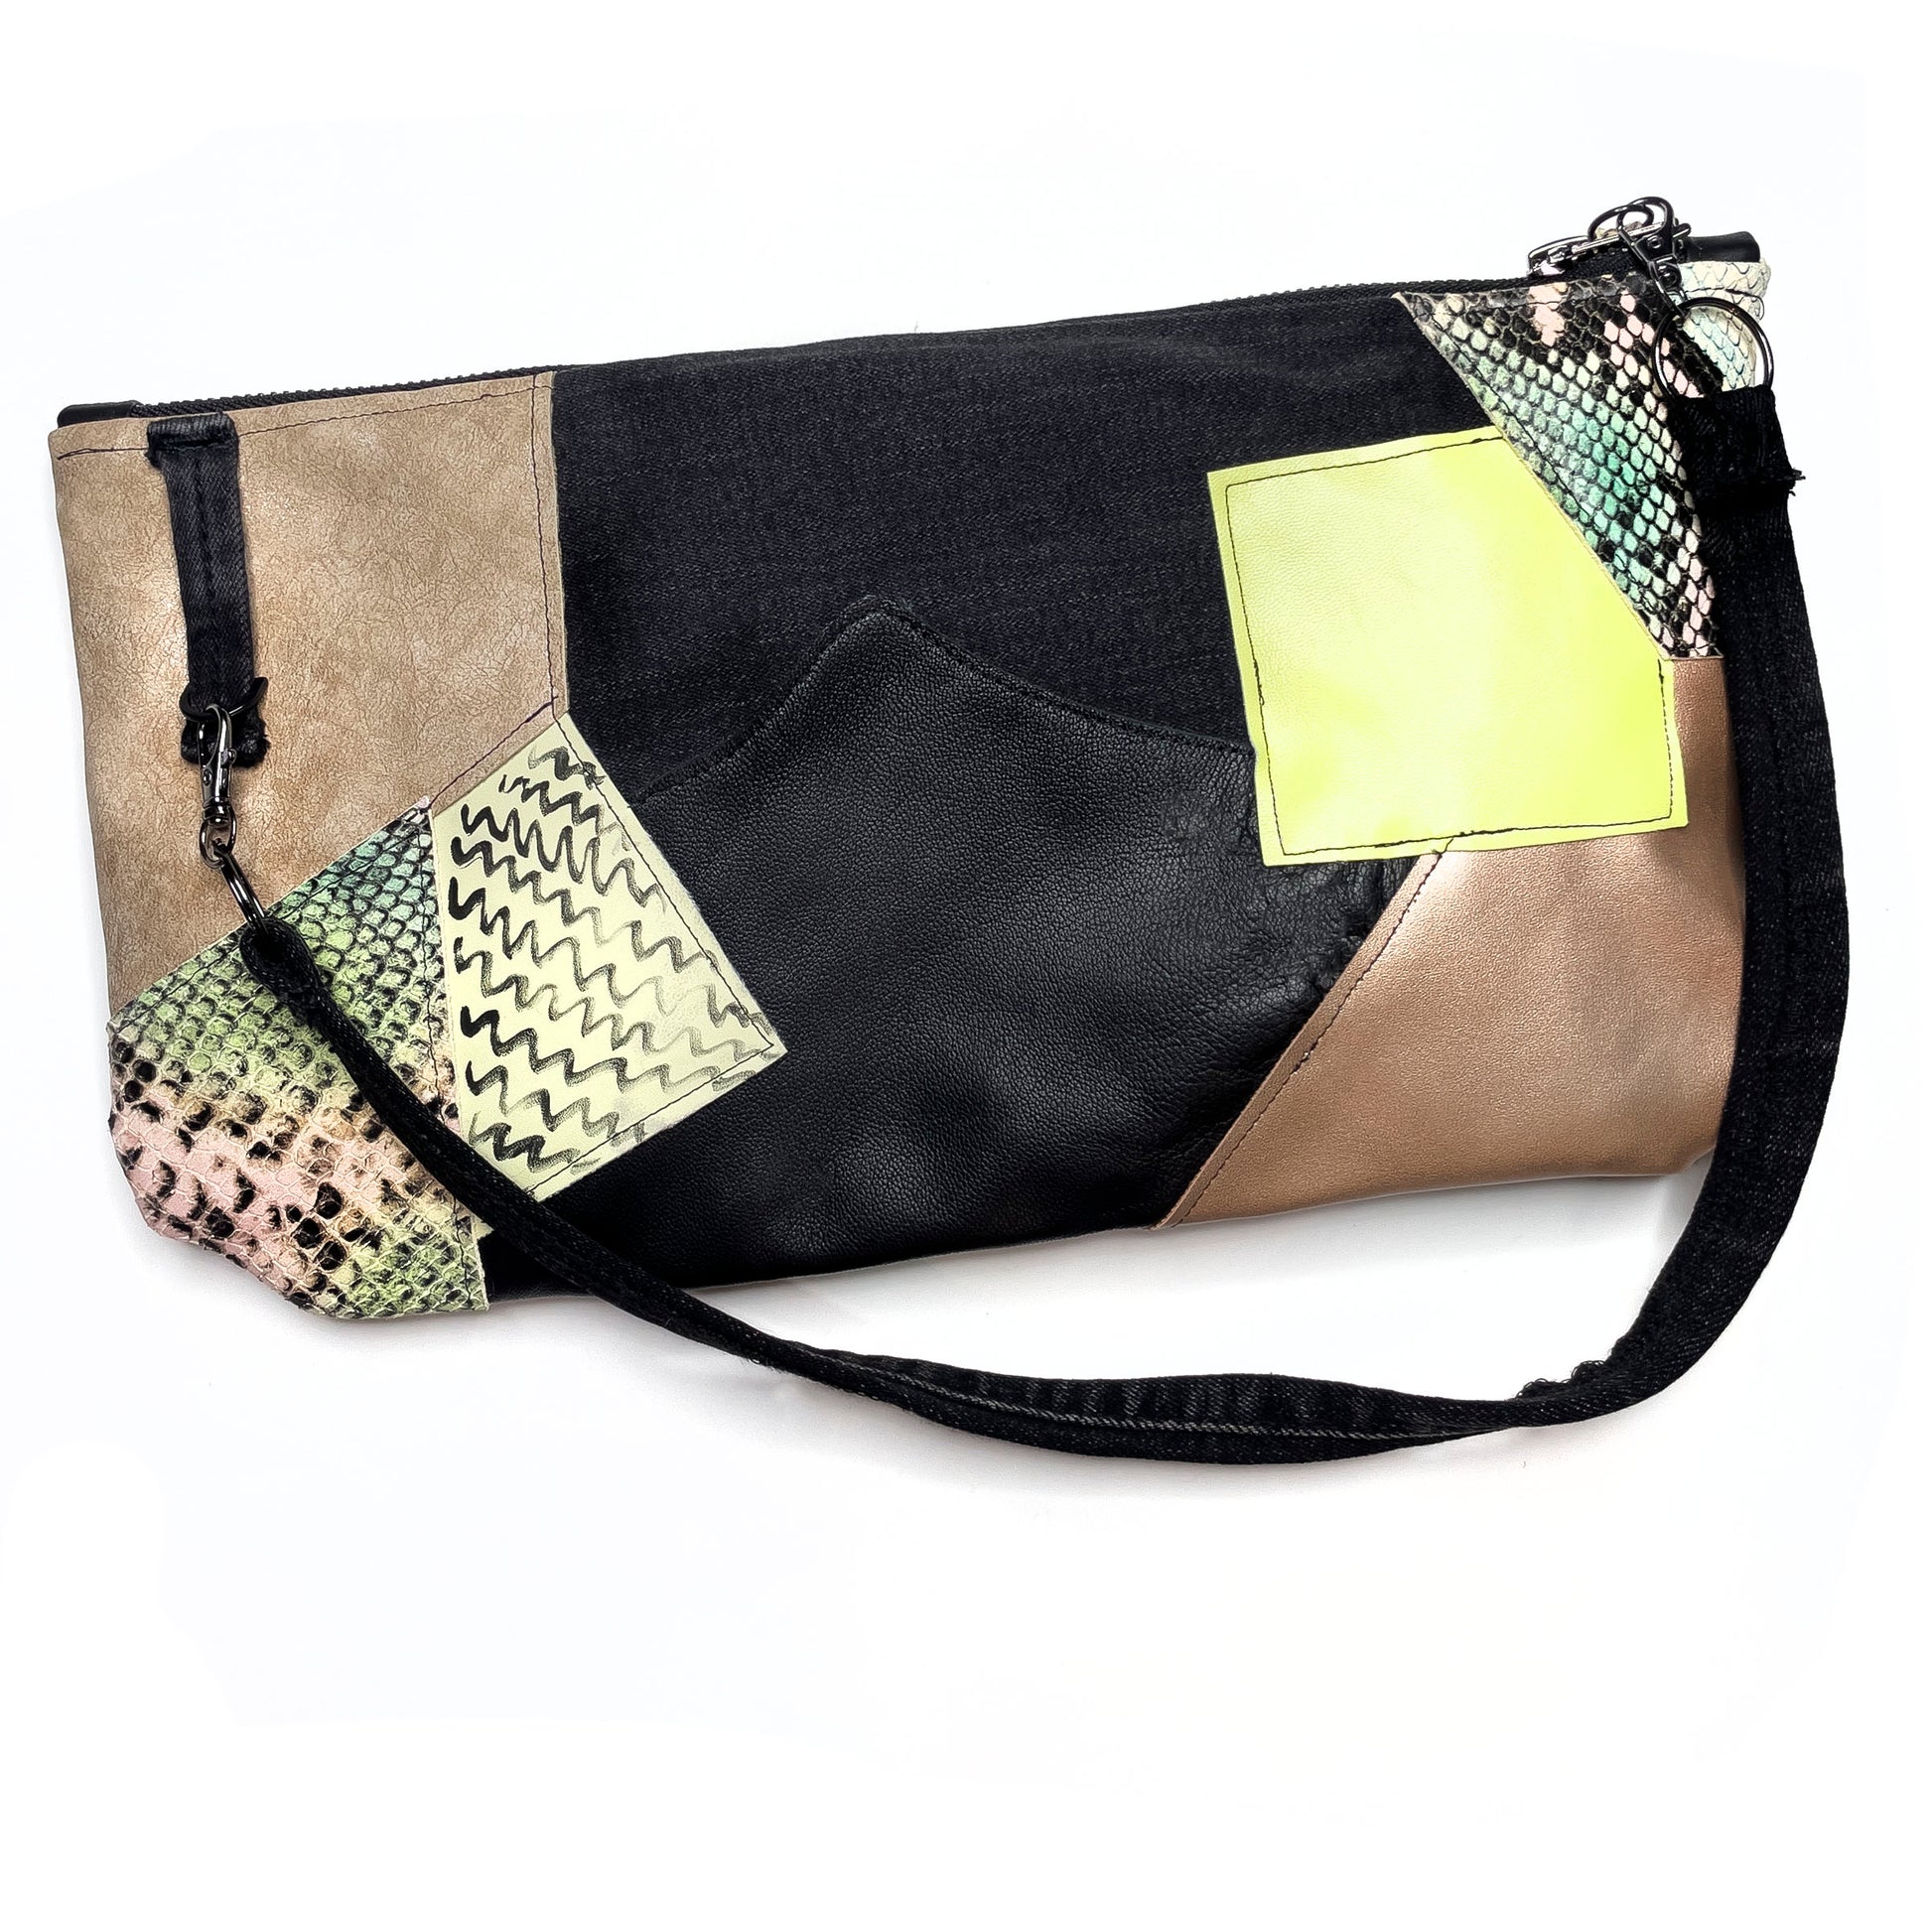 genuine leather patchwork bag from She-bang Shop, handmade ladies accessories in Brooklyn New York.